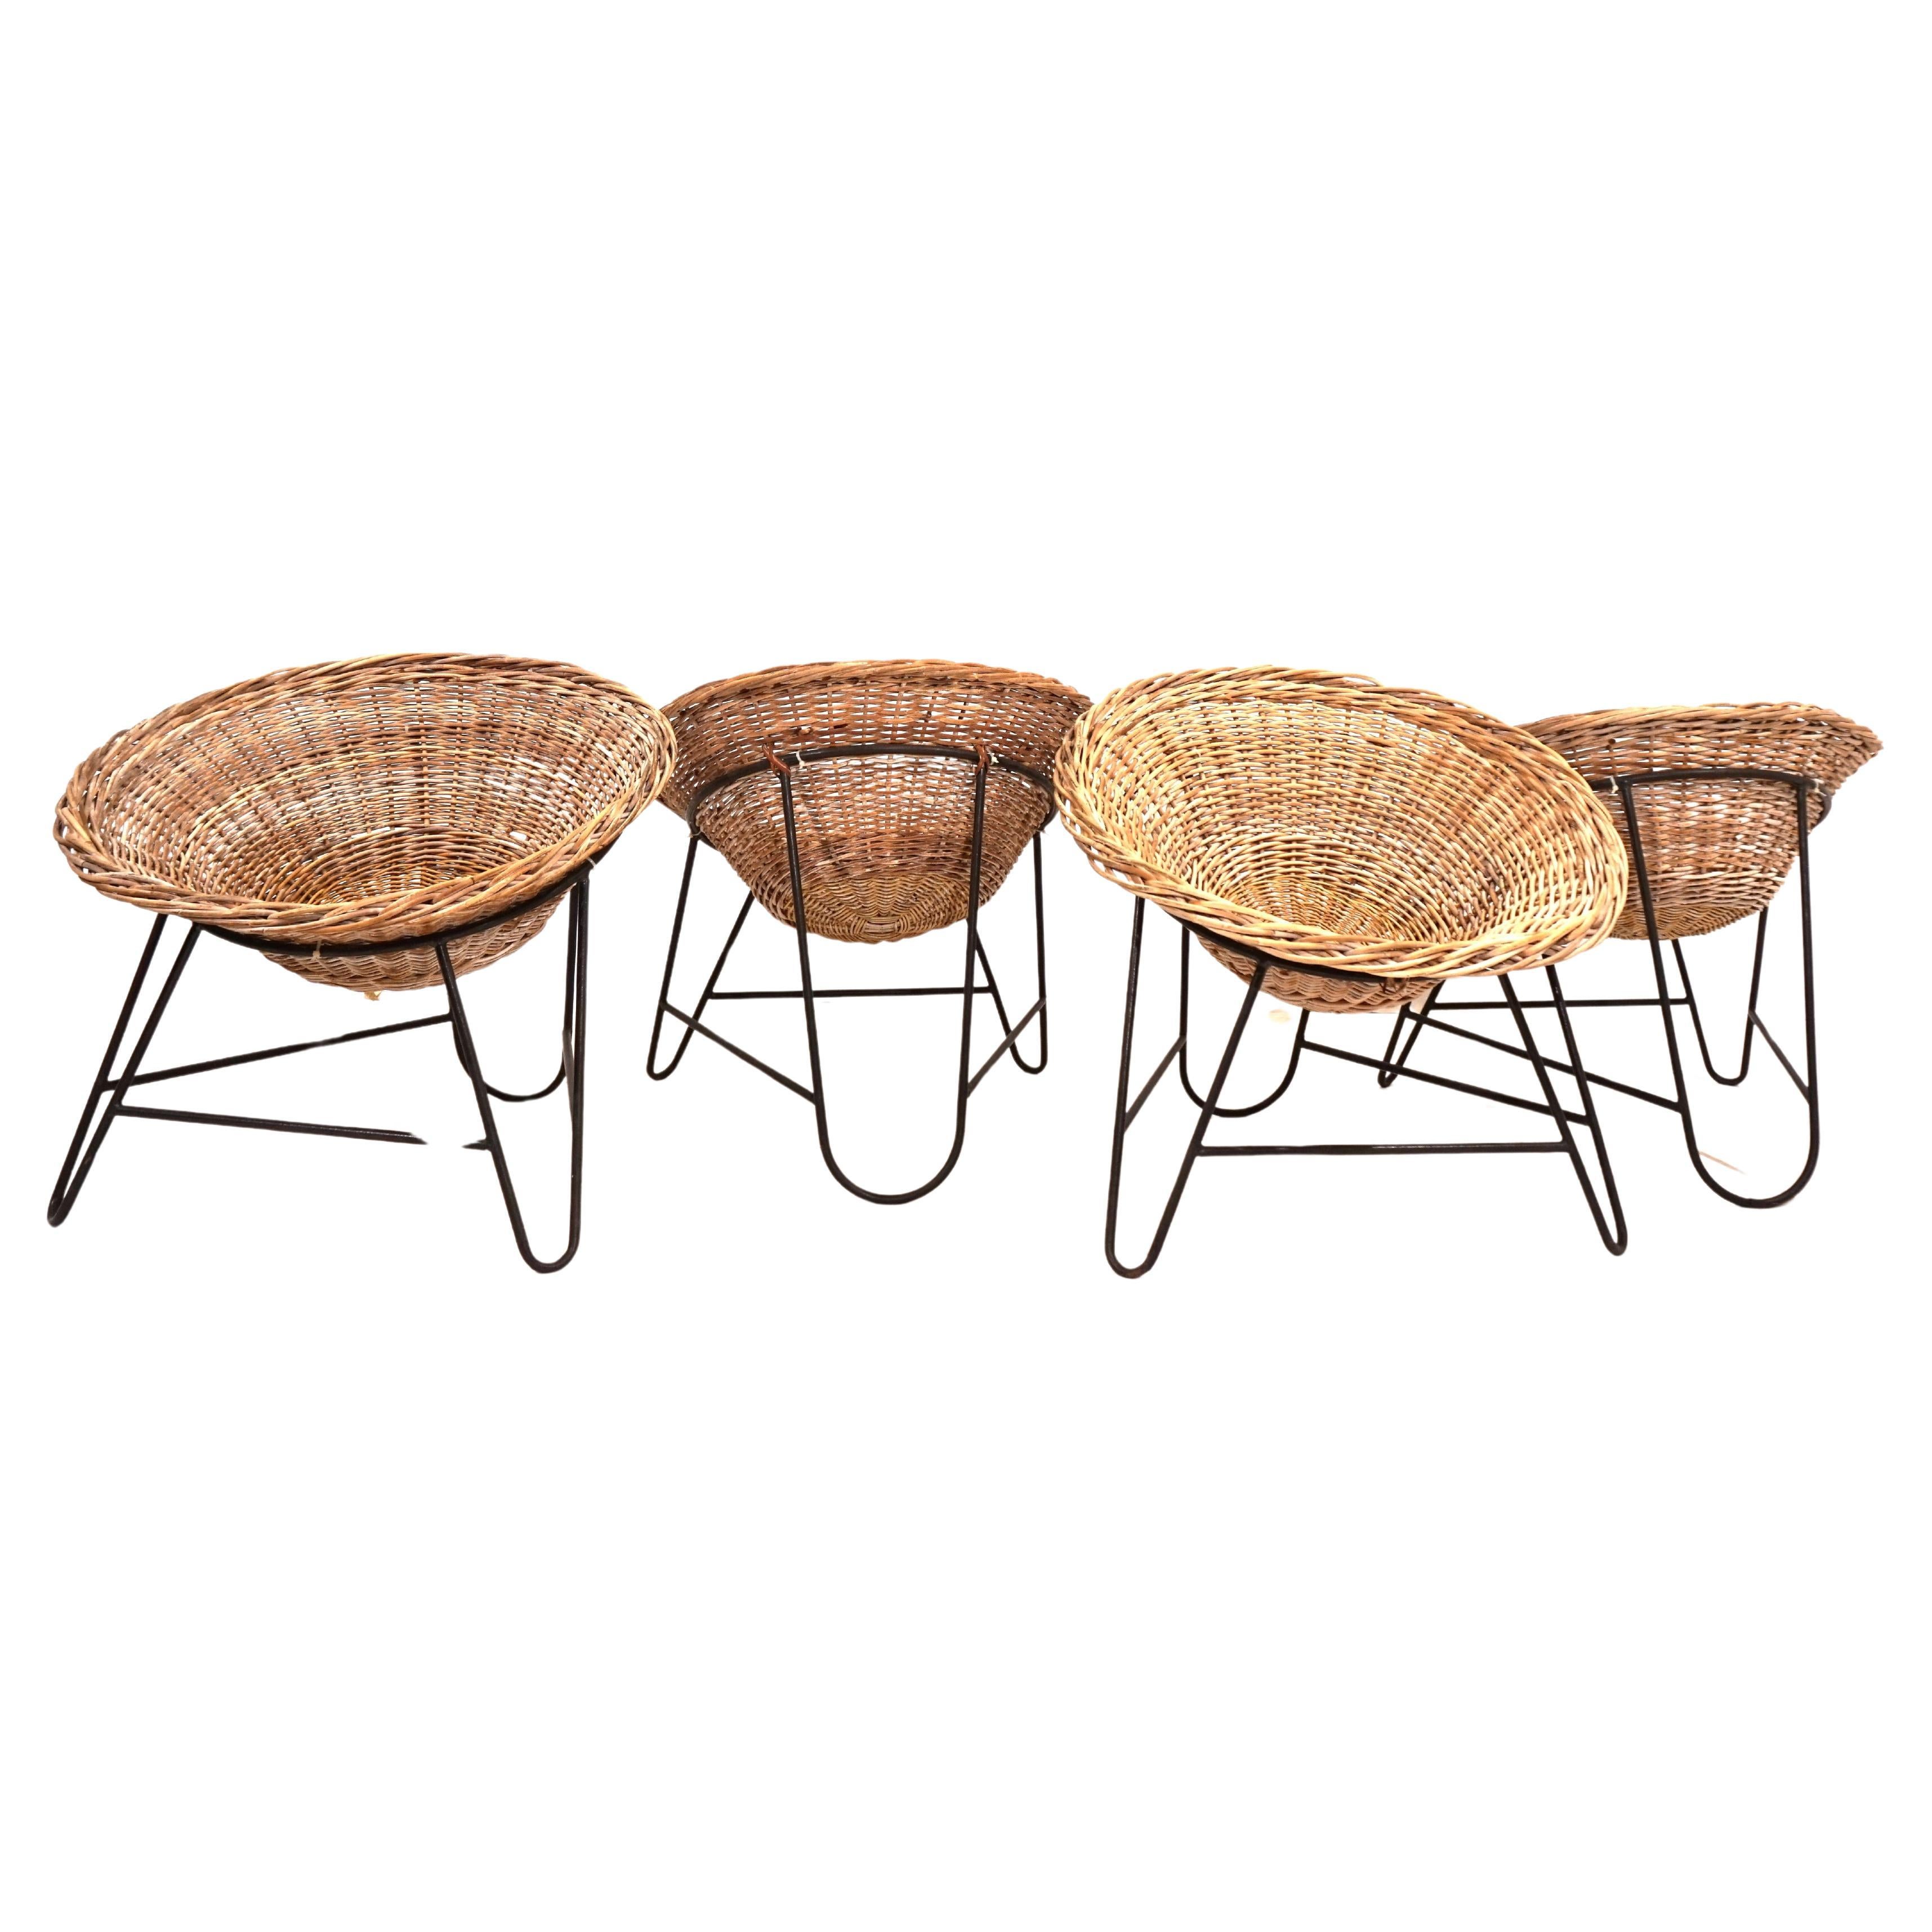 Set of 4 rattan pod chairs 60s For Sale